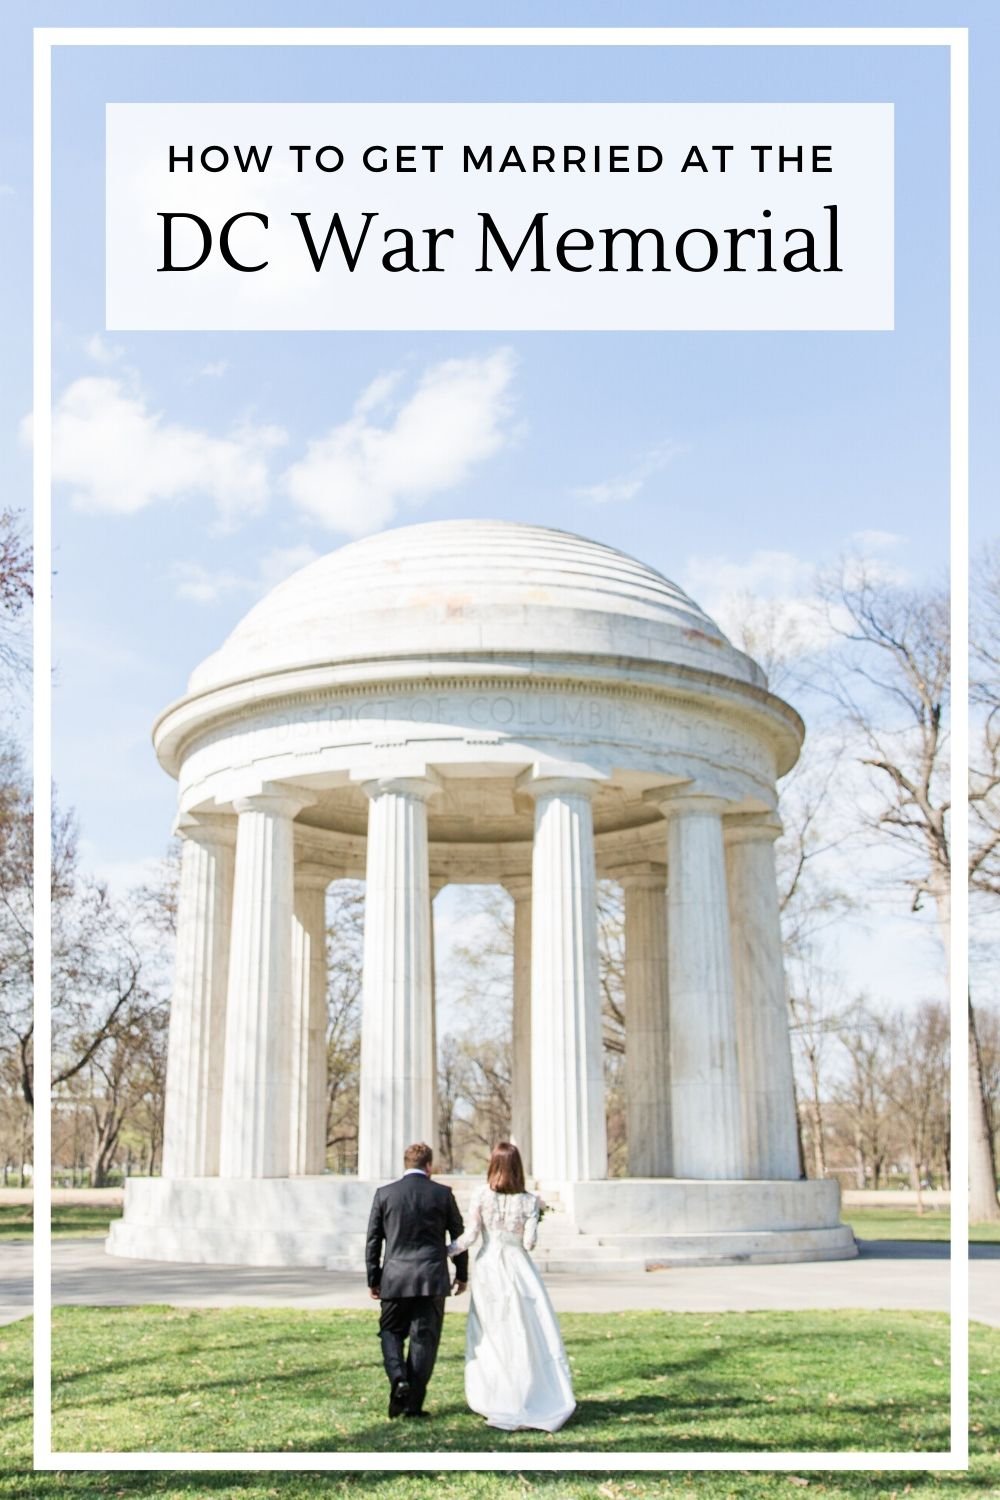 How to get married at the DC War Memorial